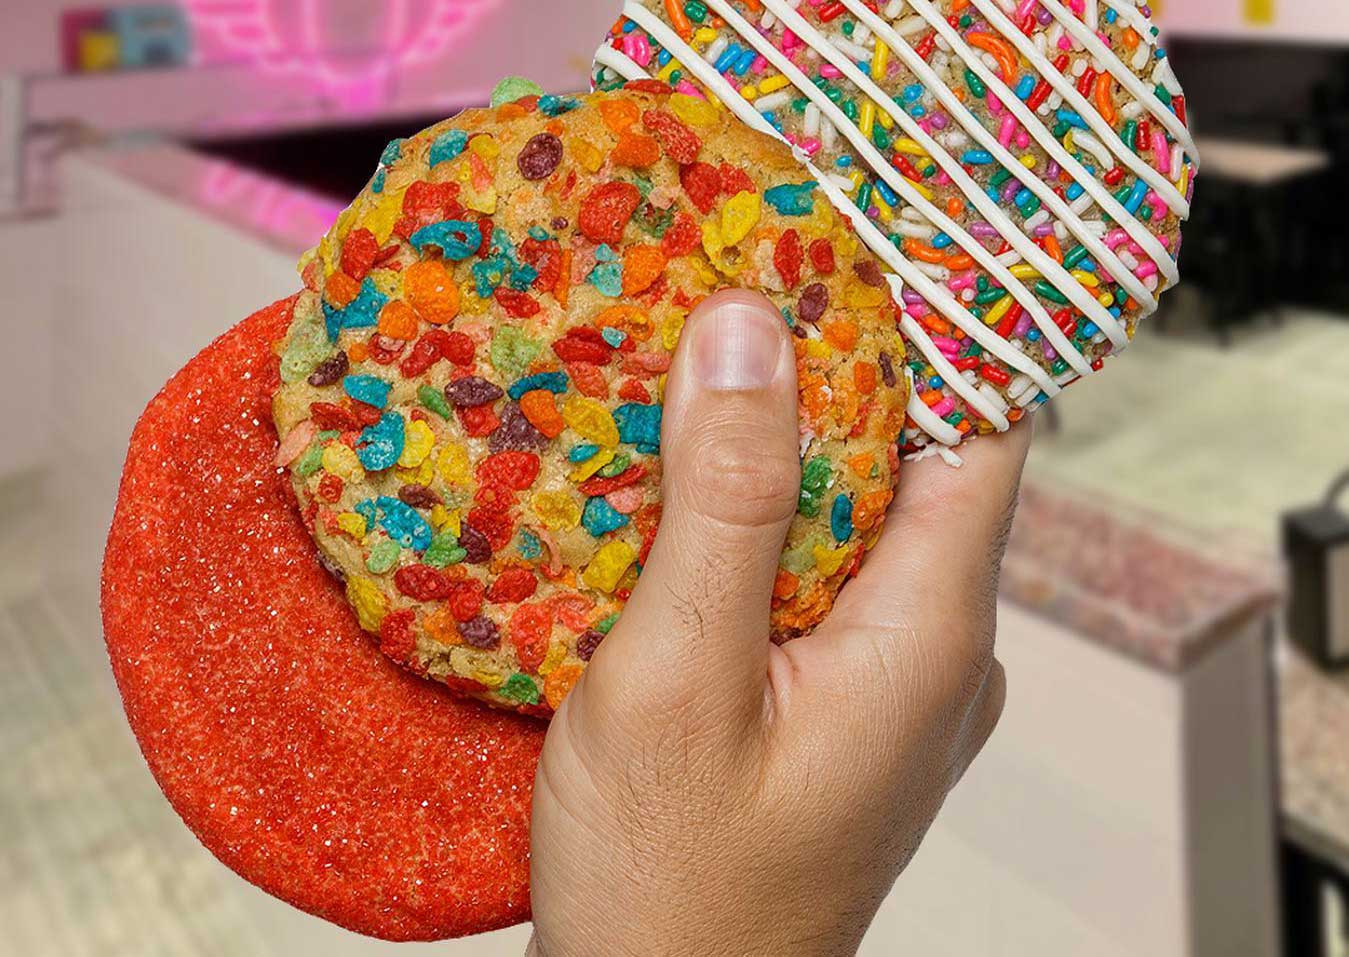 Hand holding a sample of colorful cookies